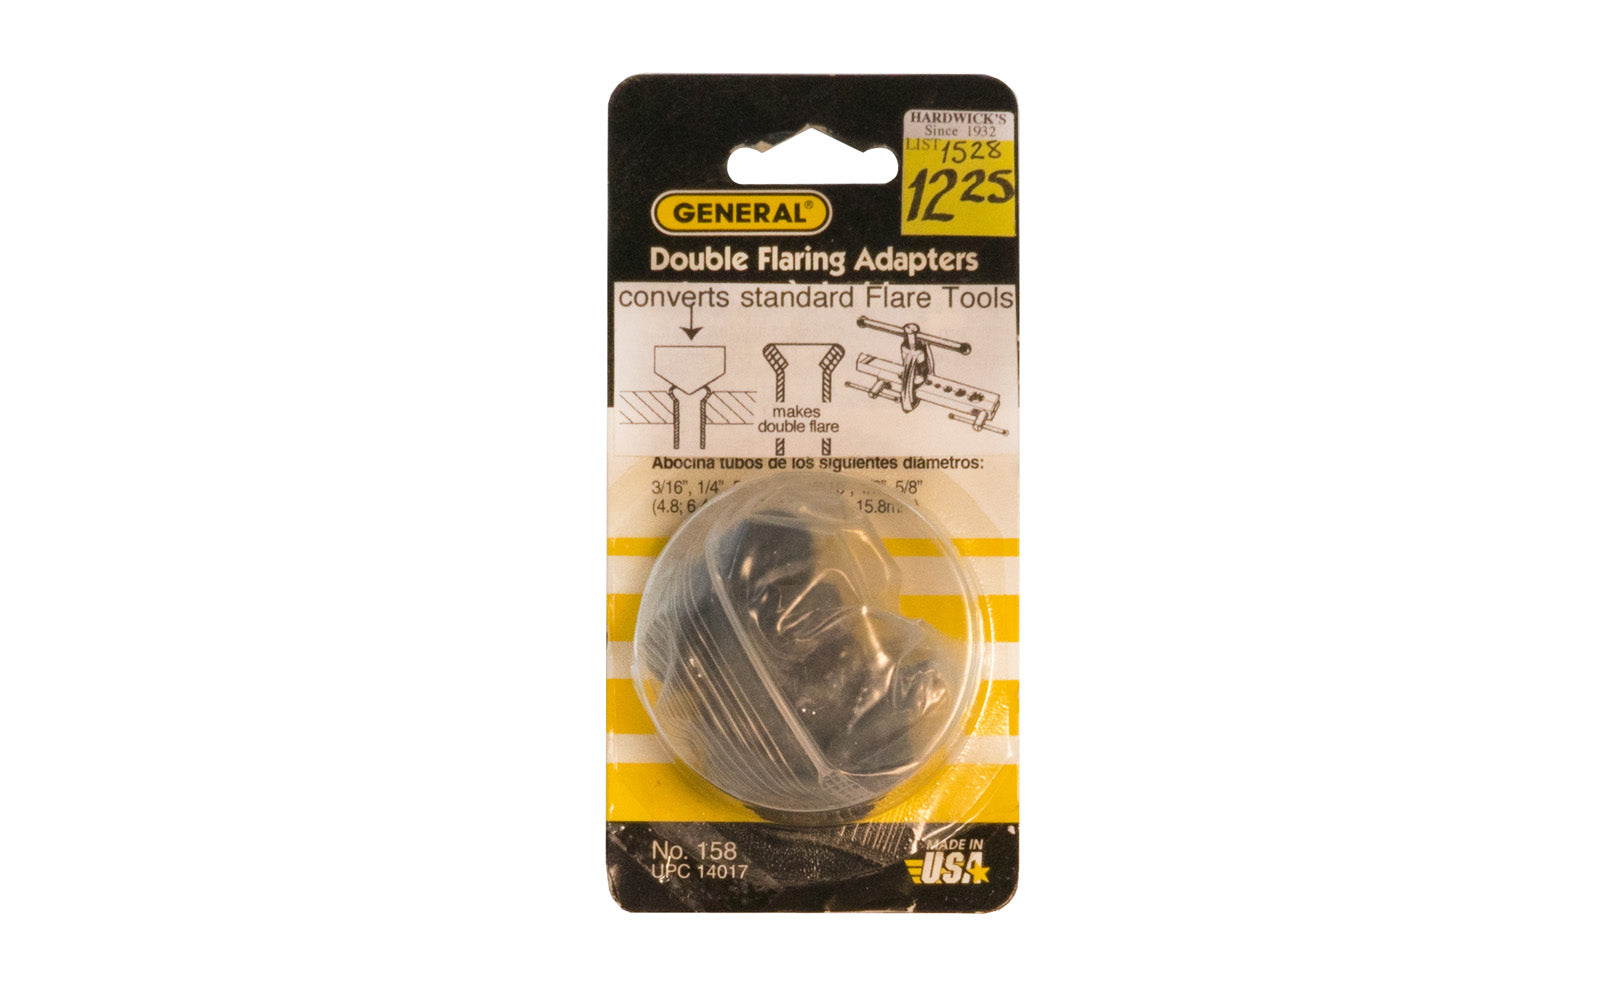 General Tools Double Flaring Adapters. Converts standard flare tools & makes a double flare. 3/16